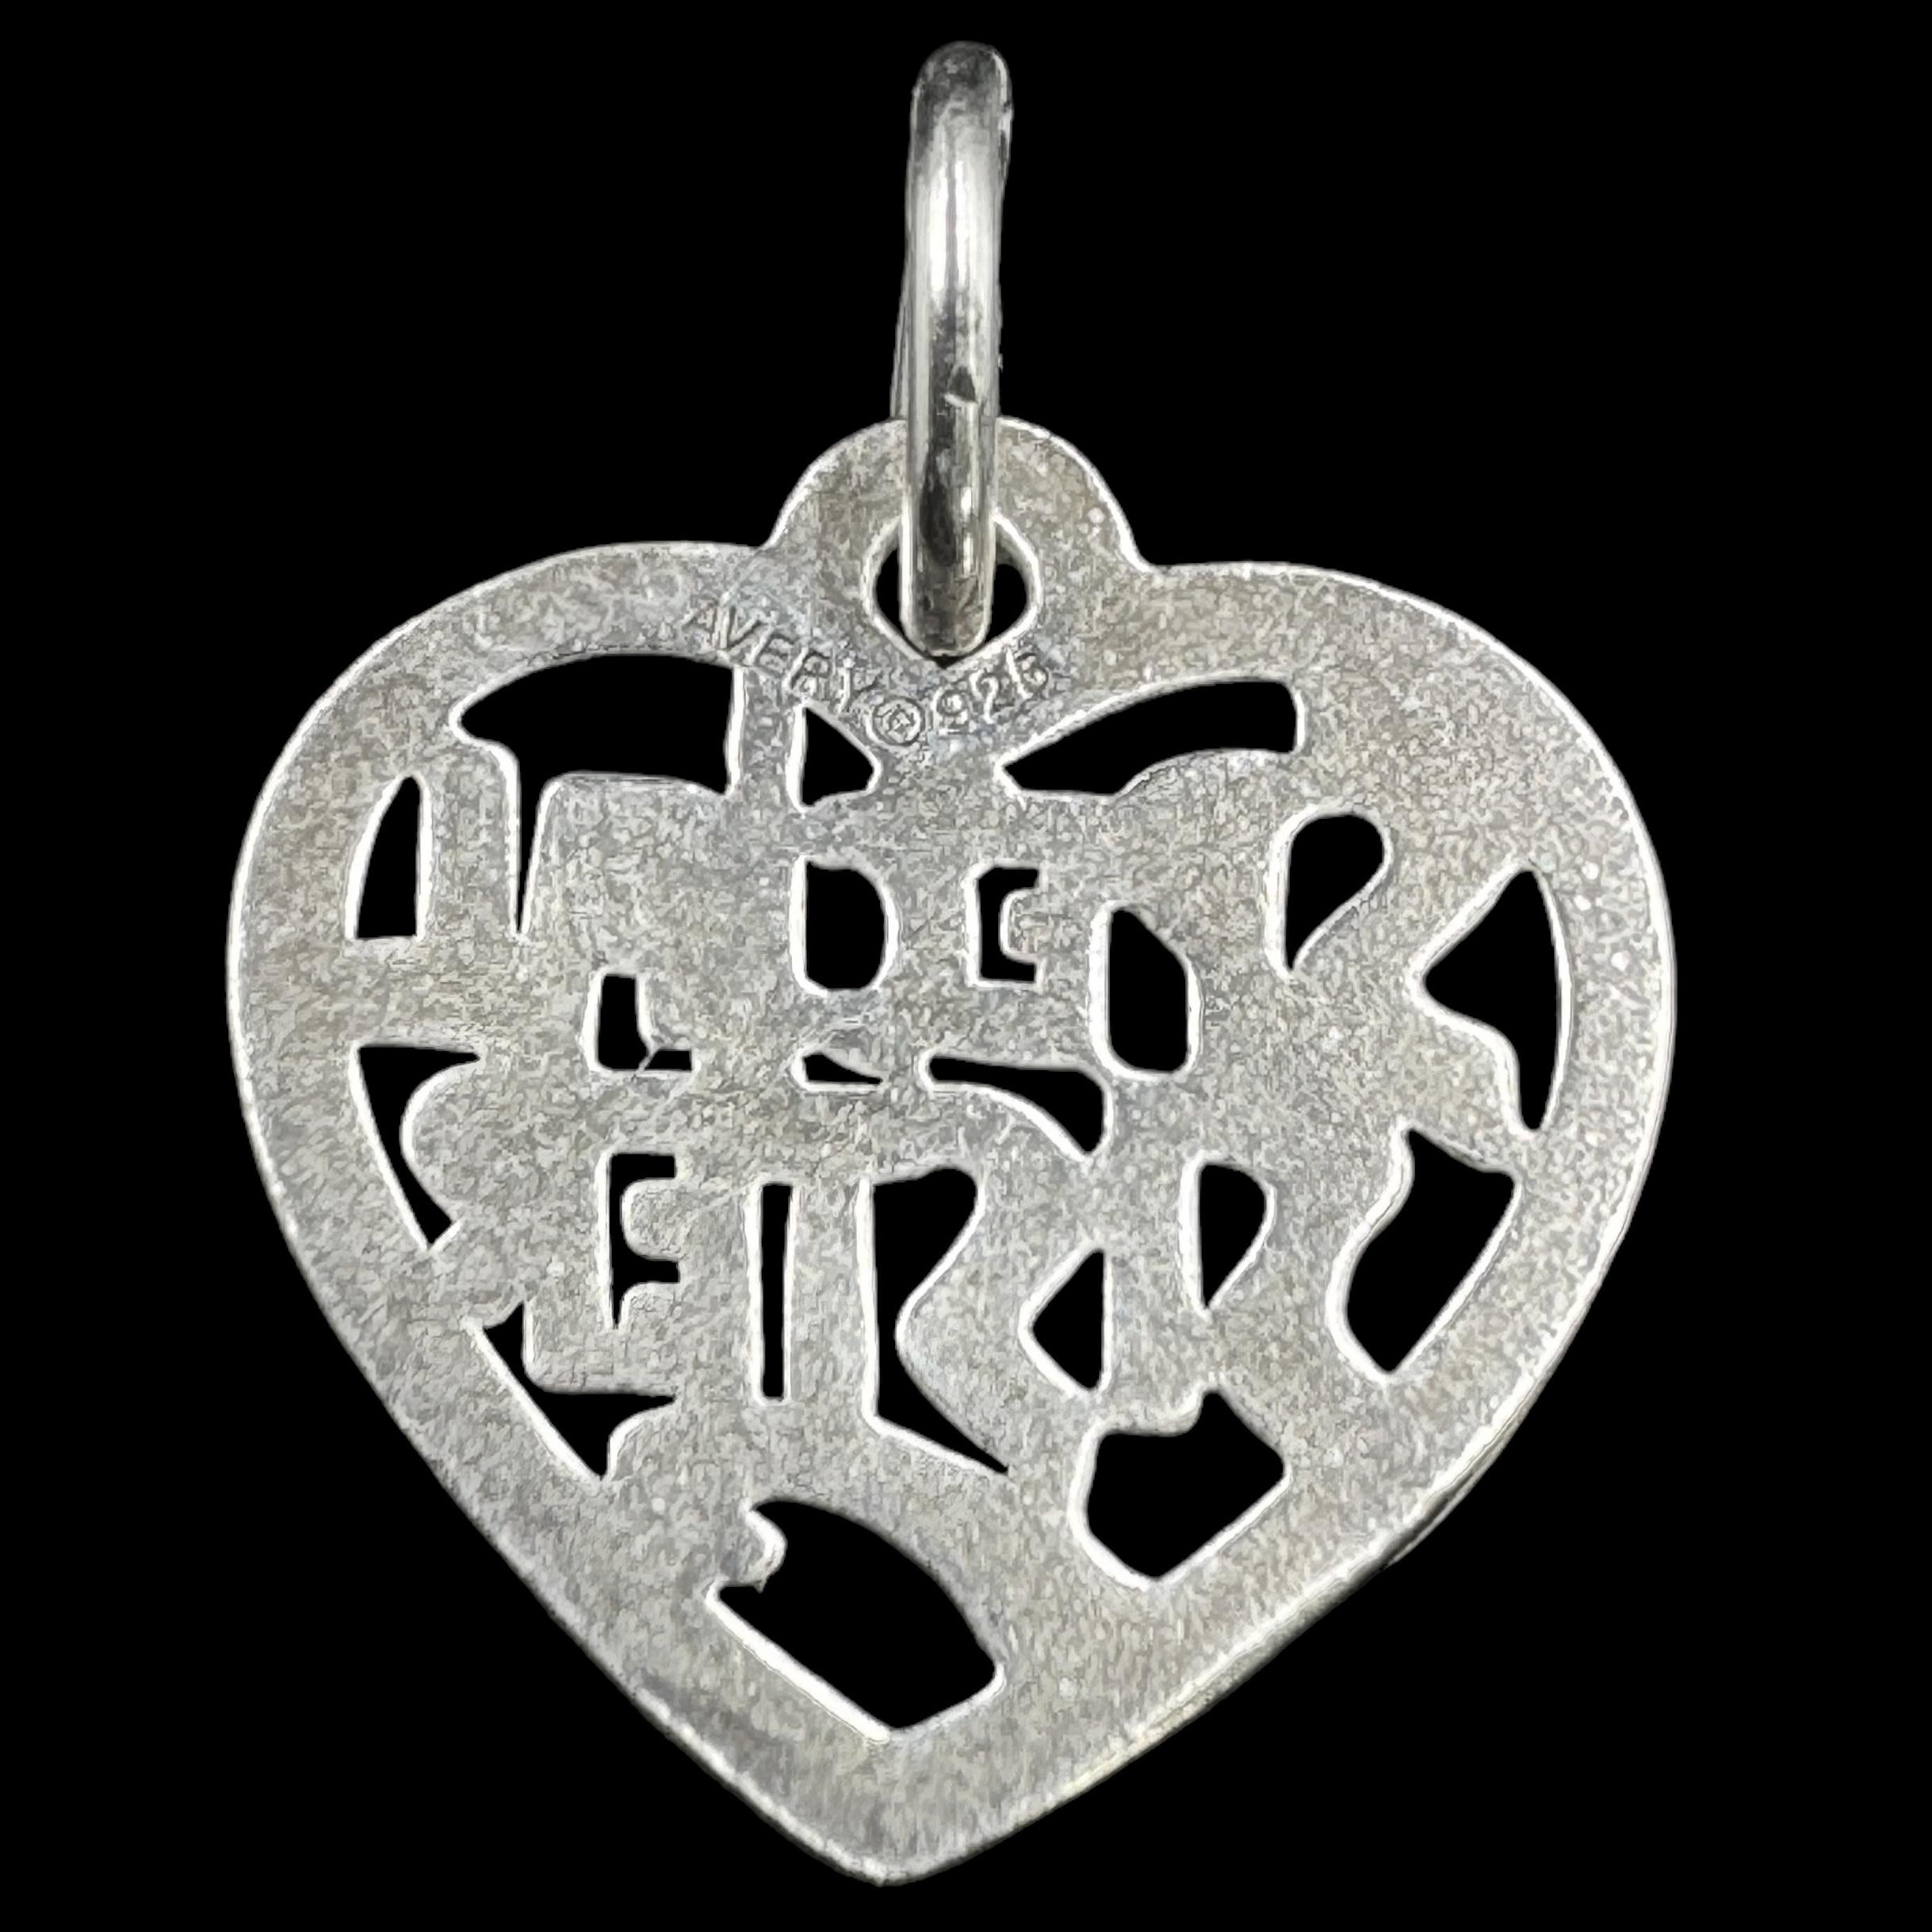 Estate James Avery sterling silver "SPECIAL SISTER" charm